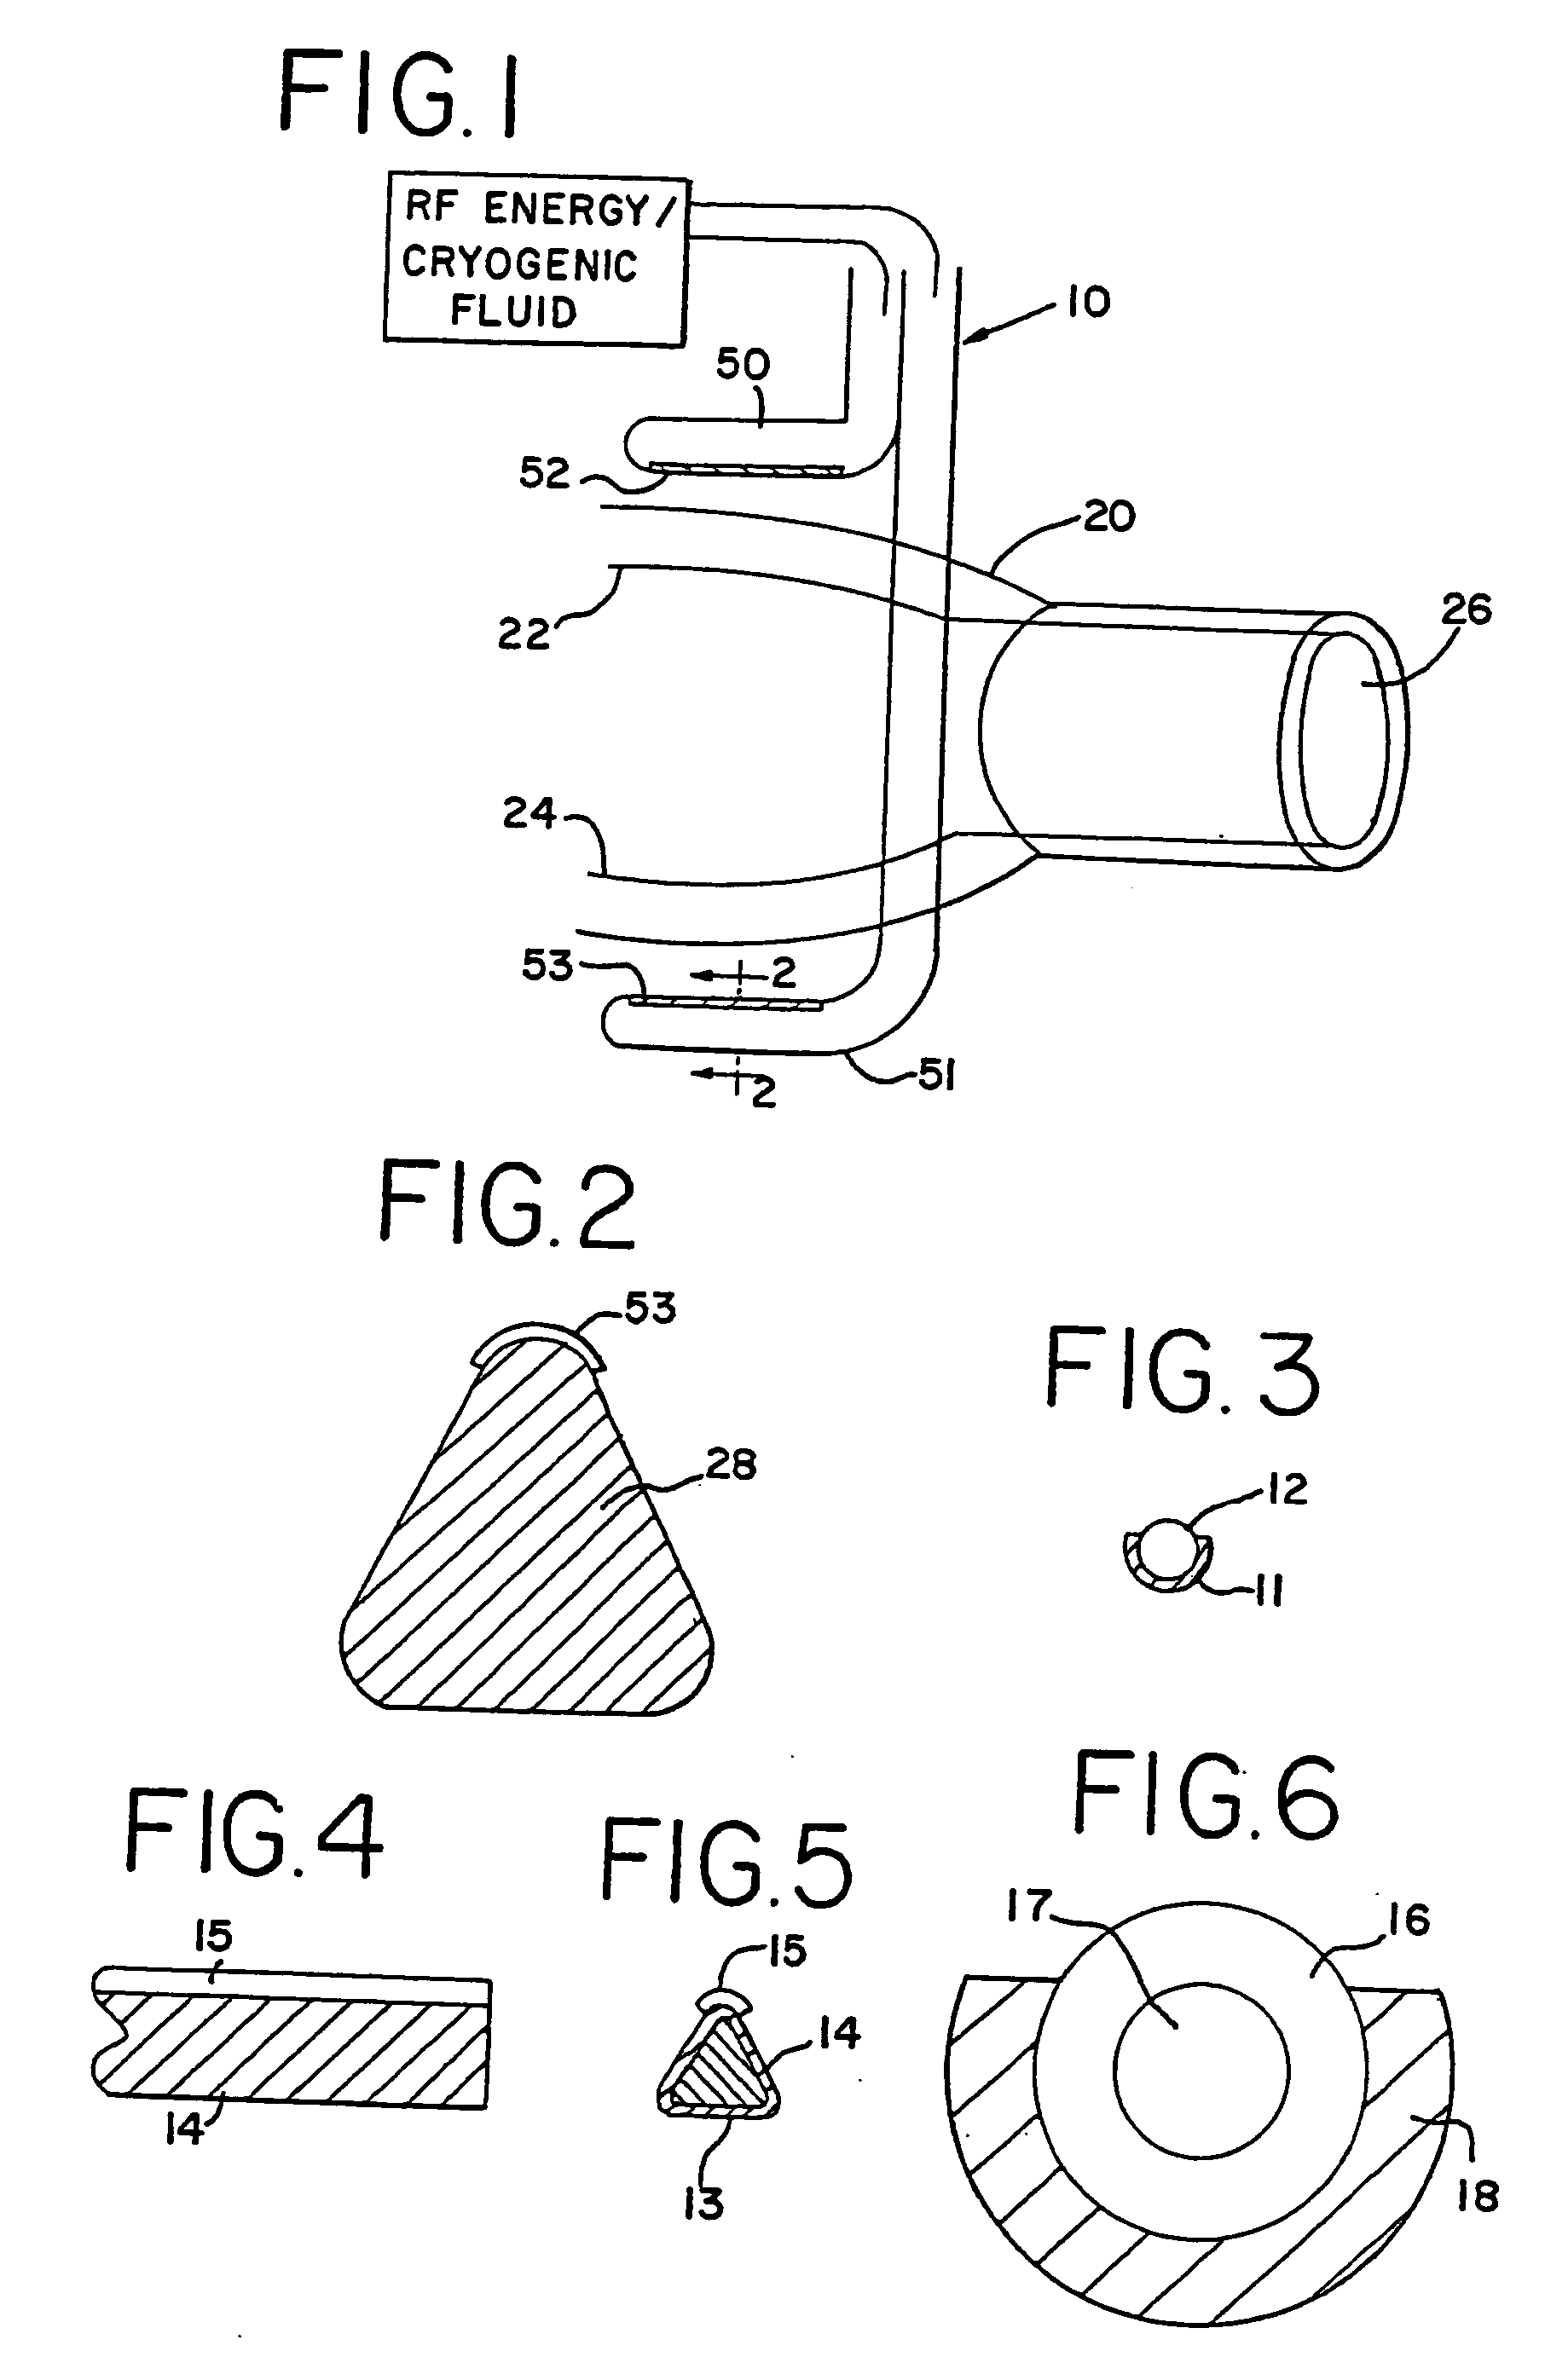 Transmural ablation device with parallel electrodes